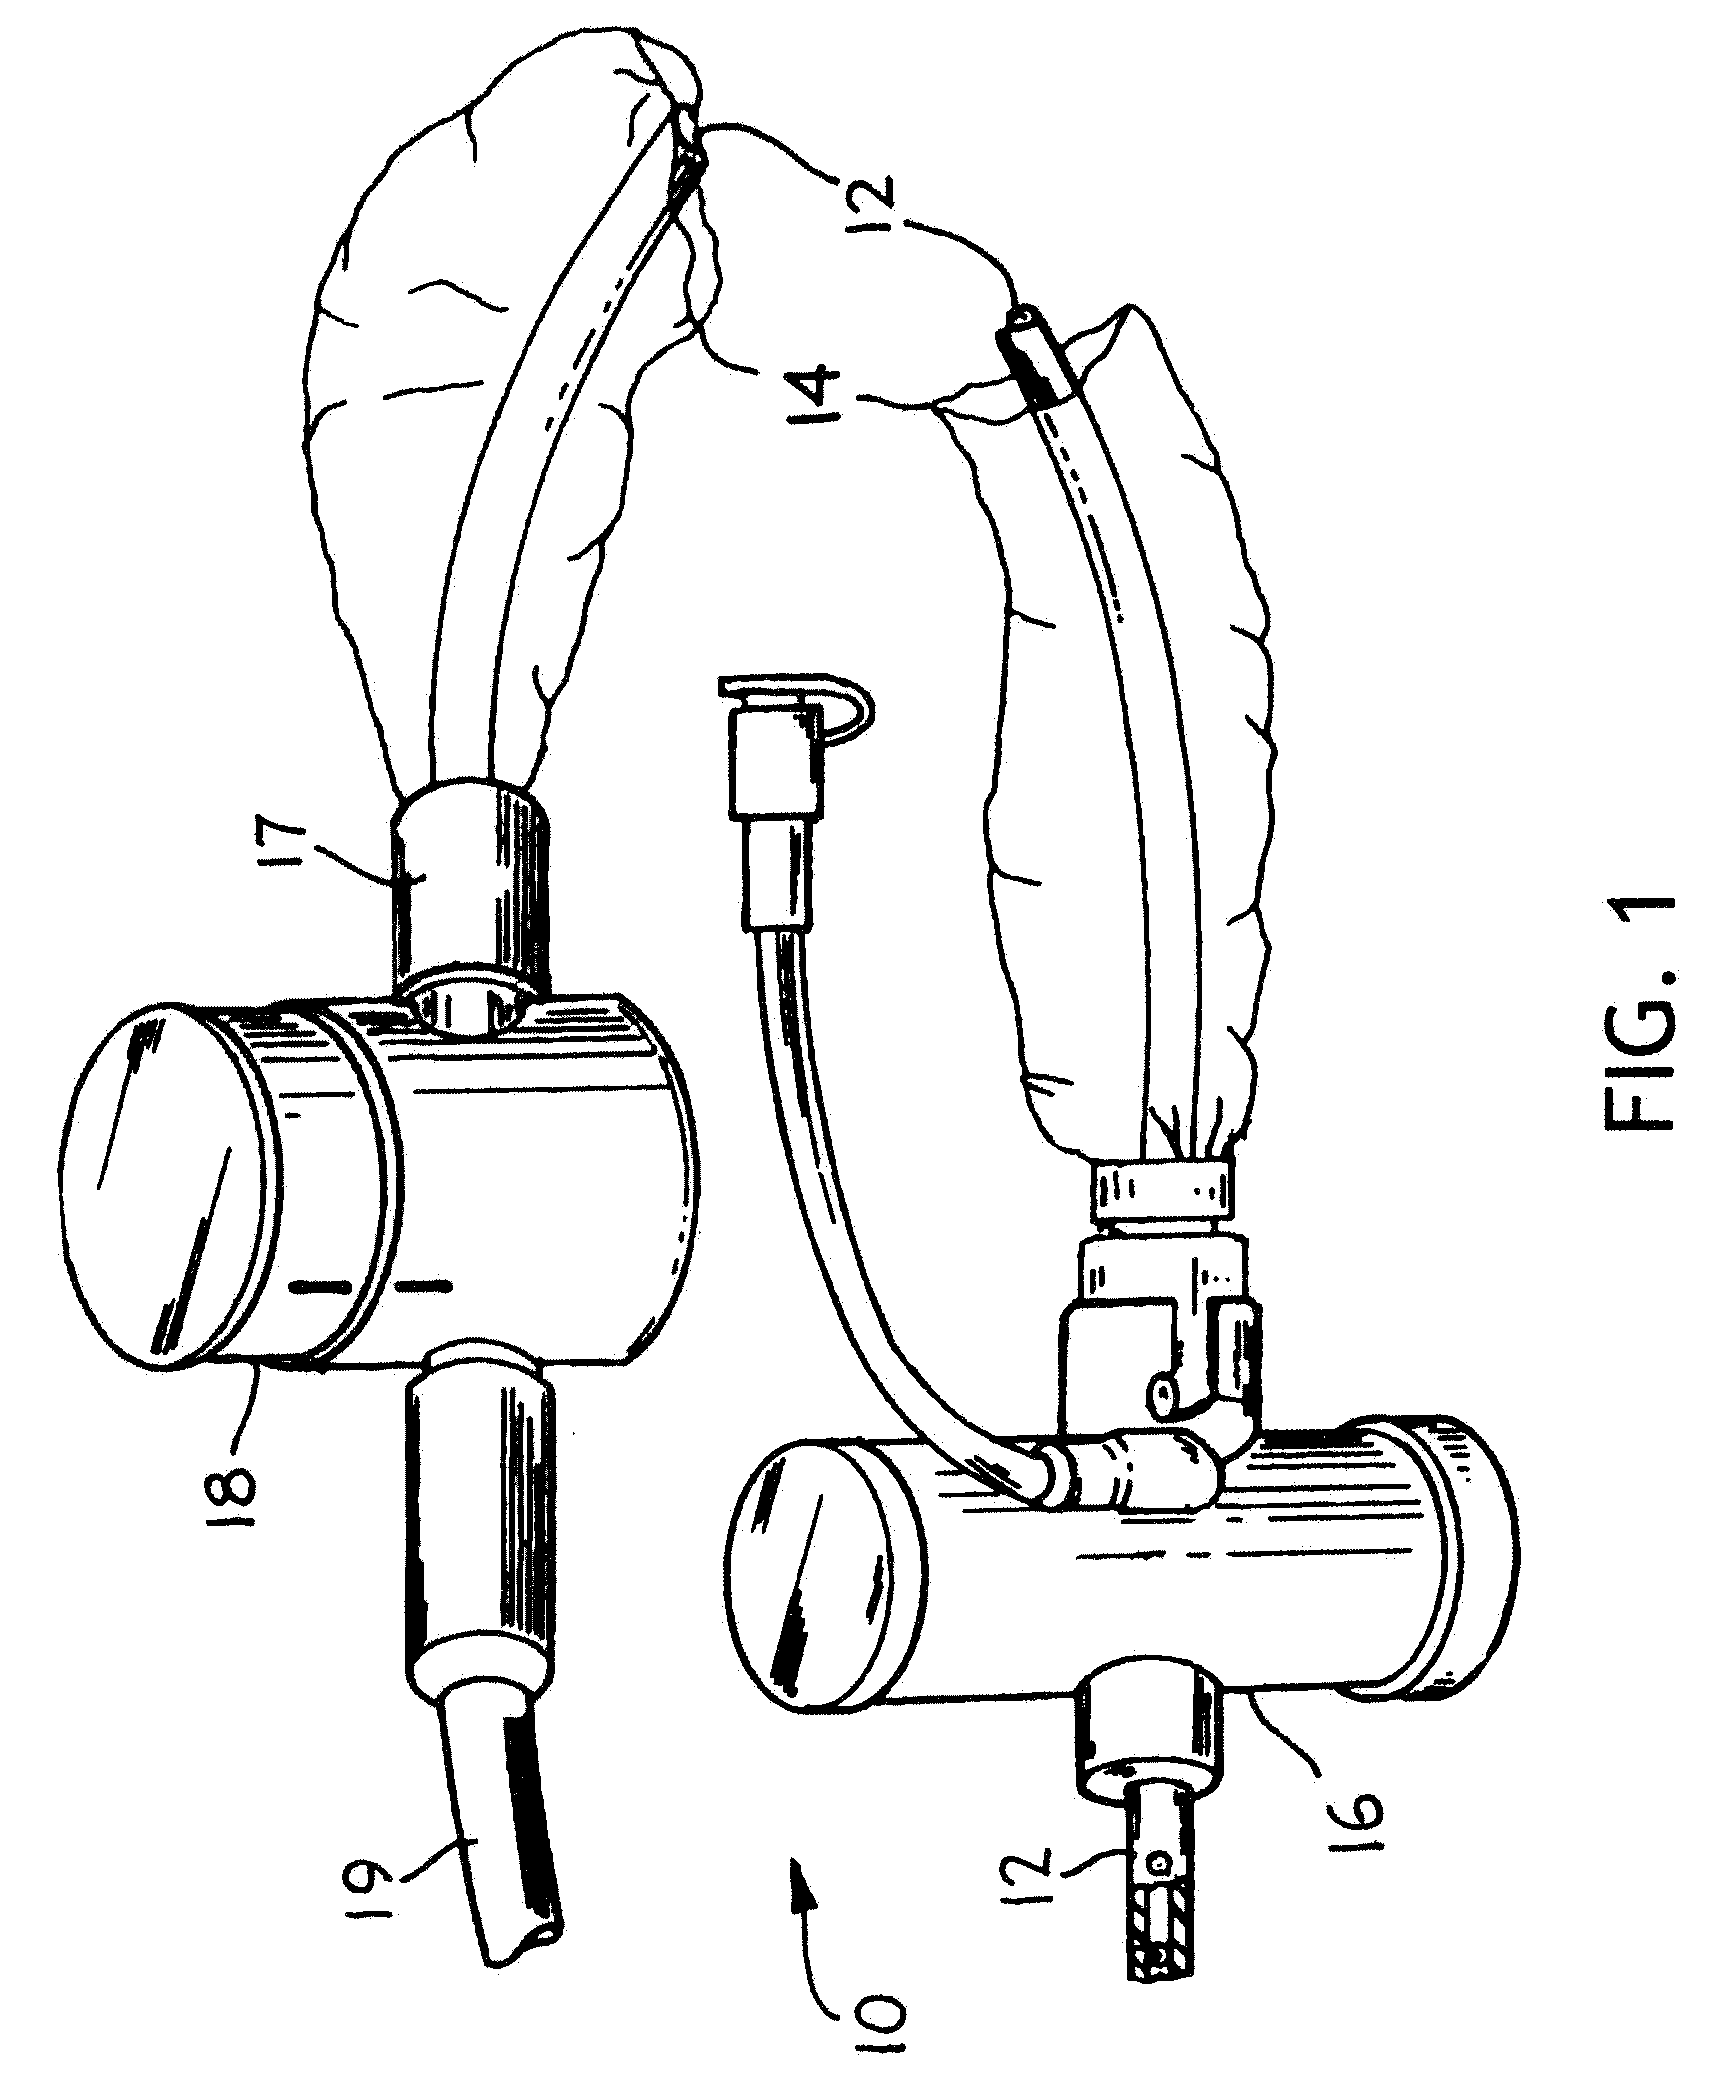 Port Sealing Cartridge for Medical Ventilating and Aspirating Devices